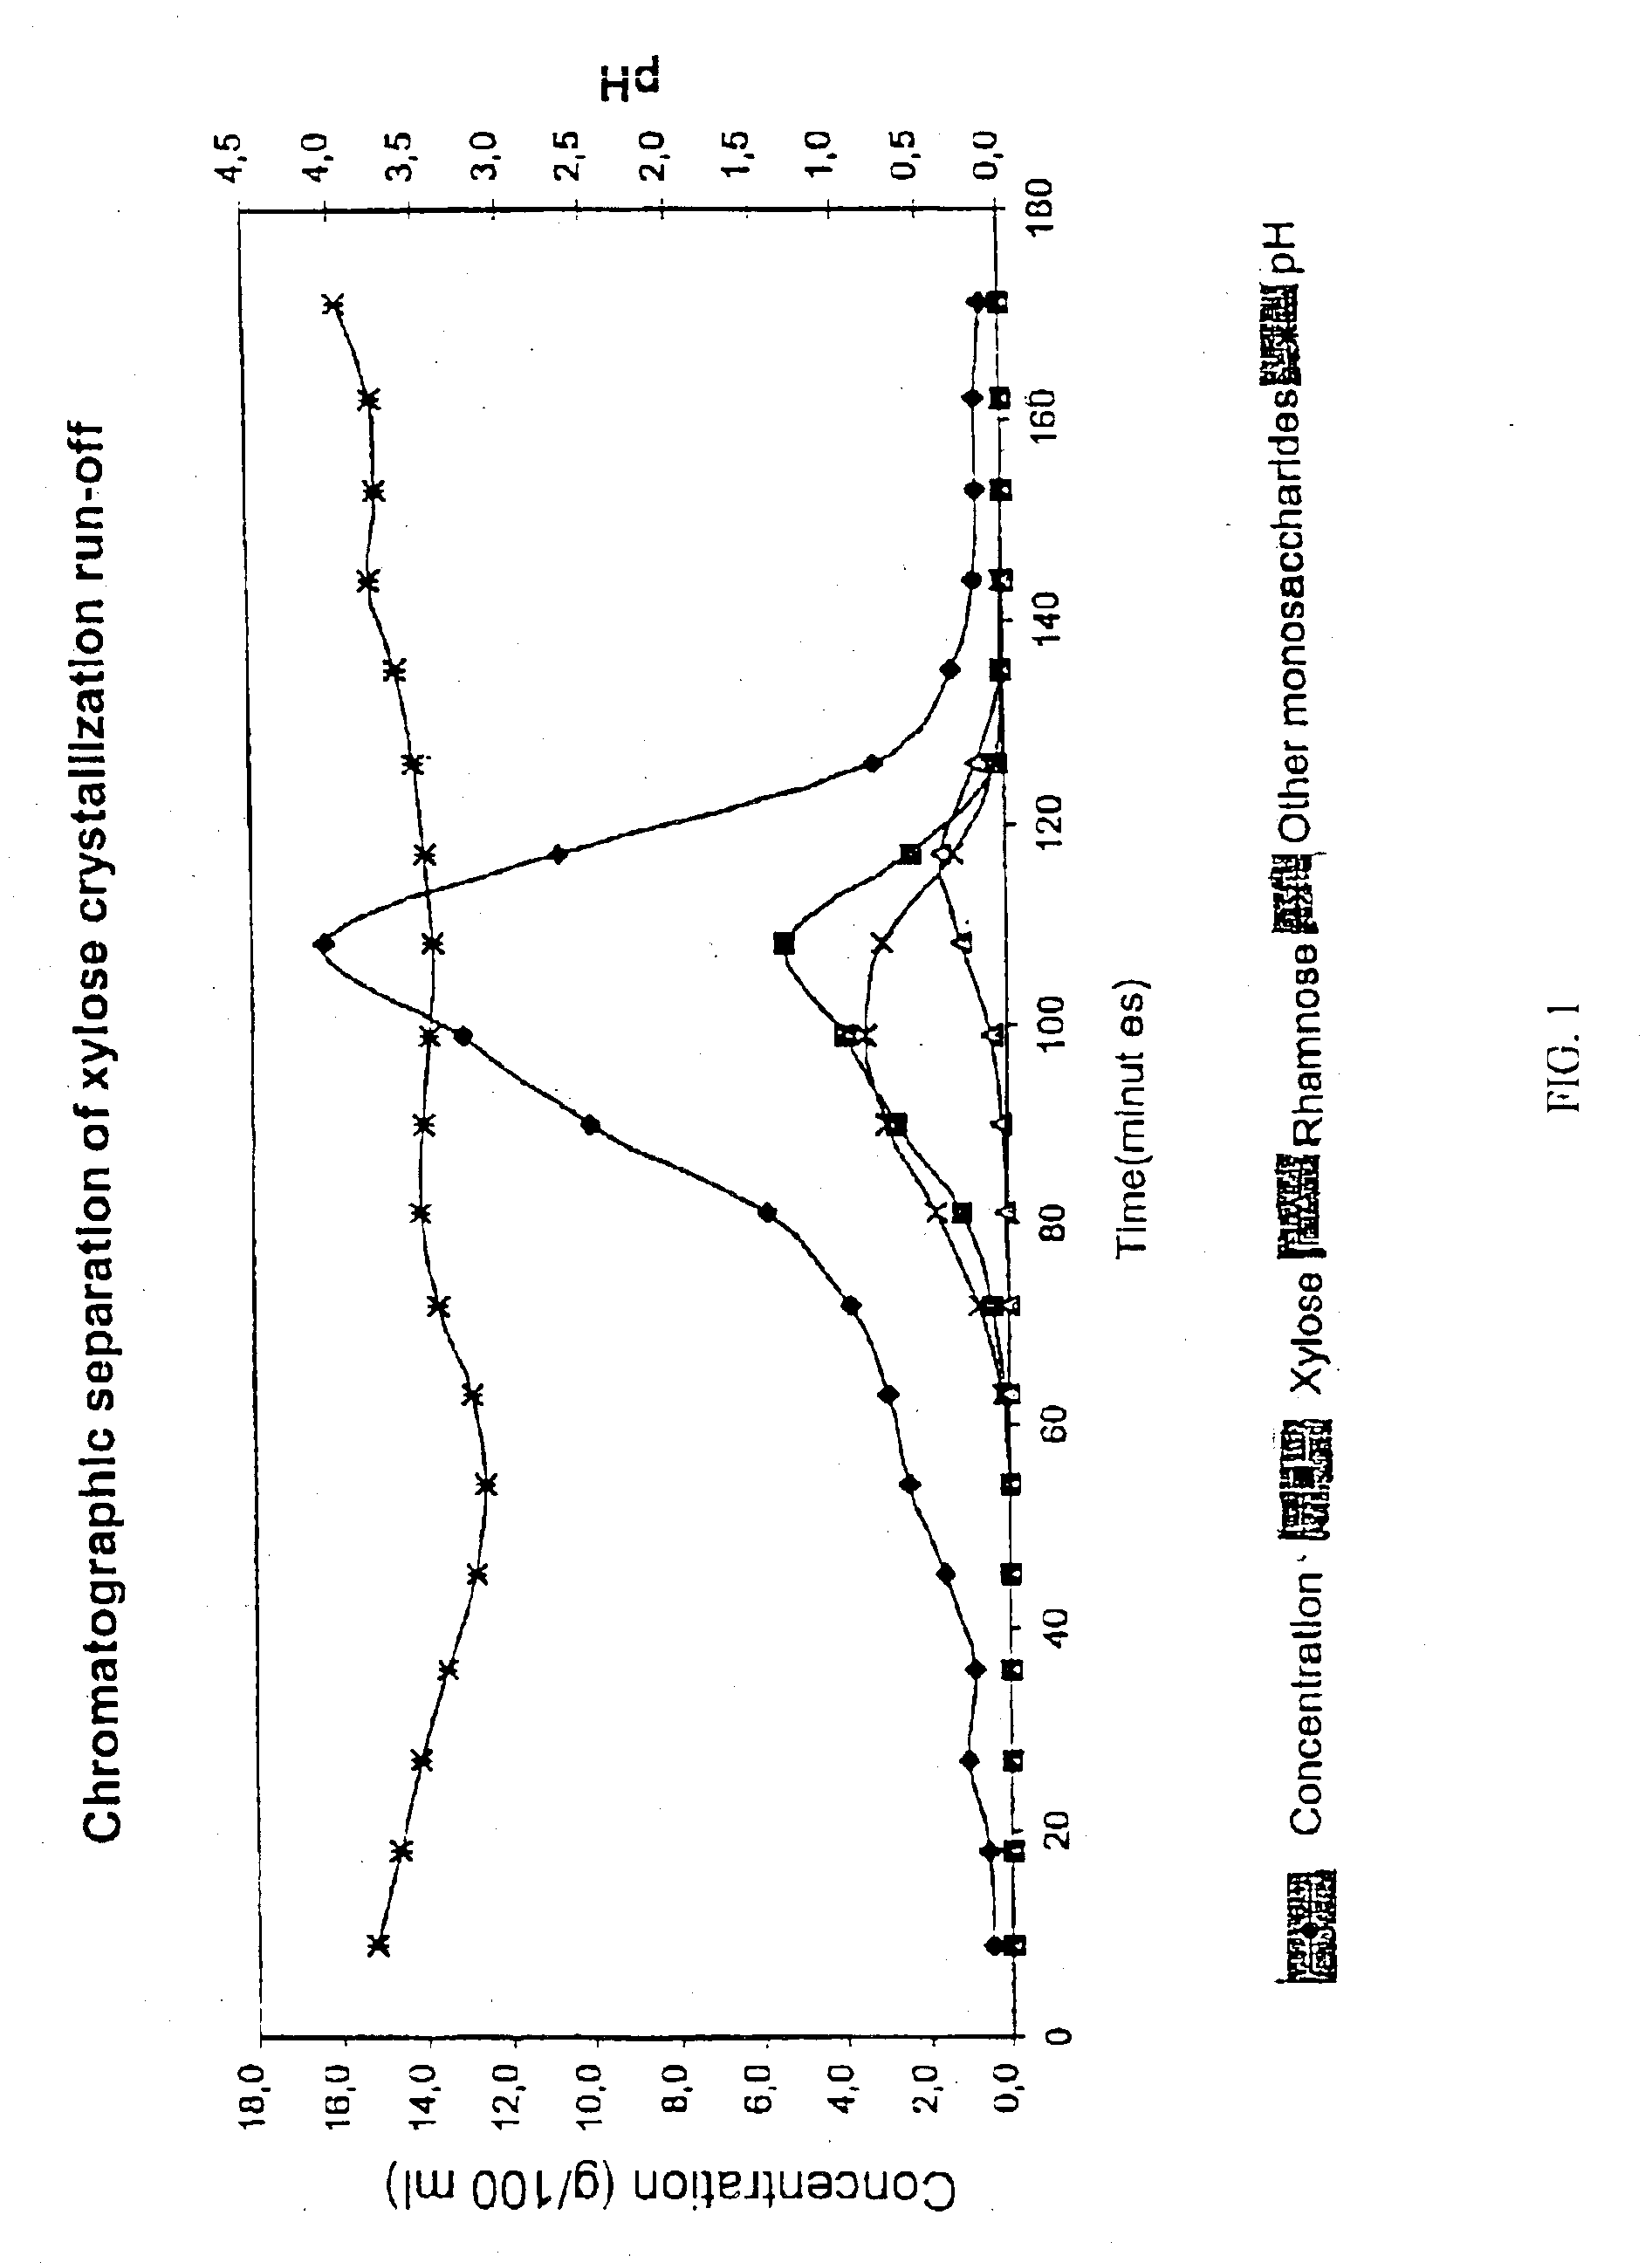 Use of a weakly acid cation exchange resin for chromatographic separation of carbohydrates